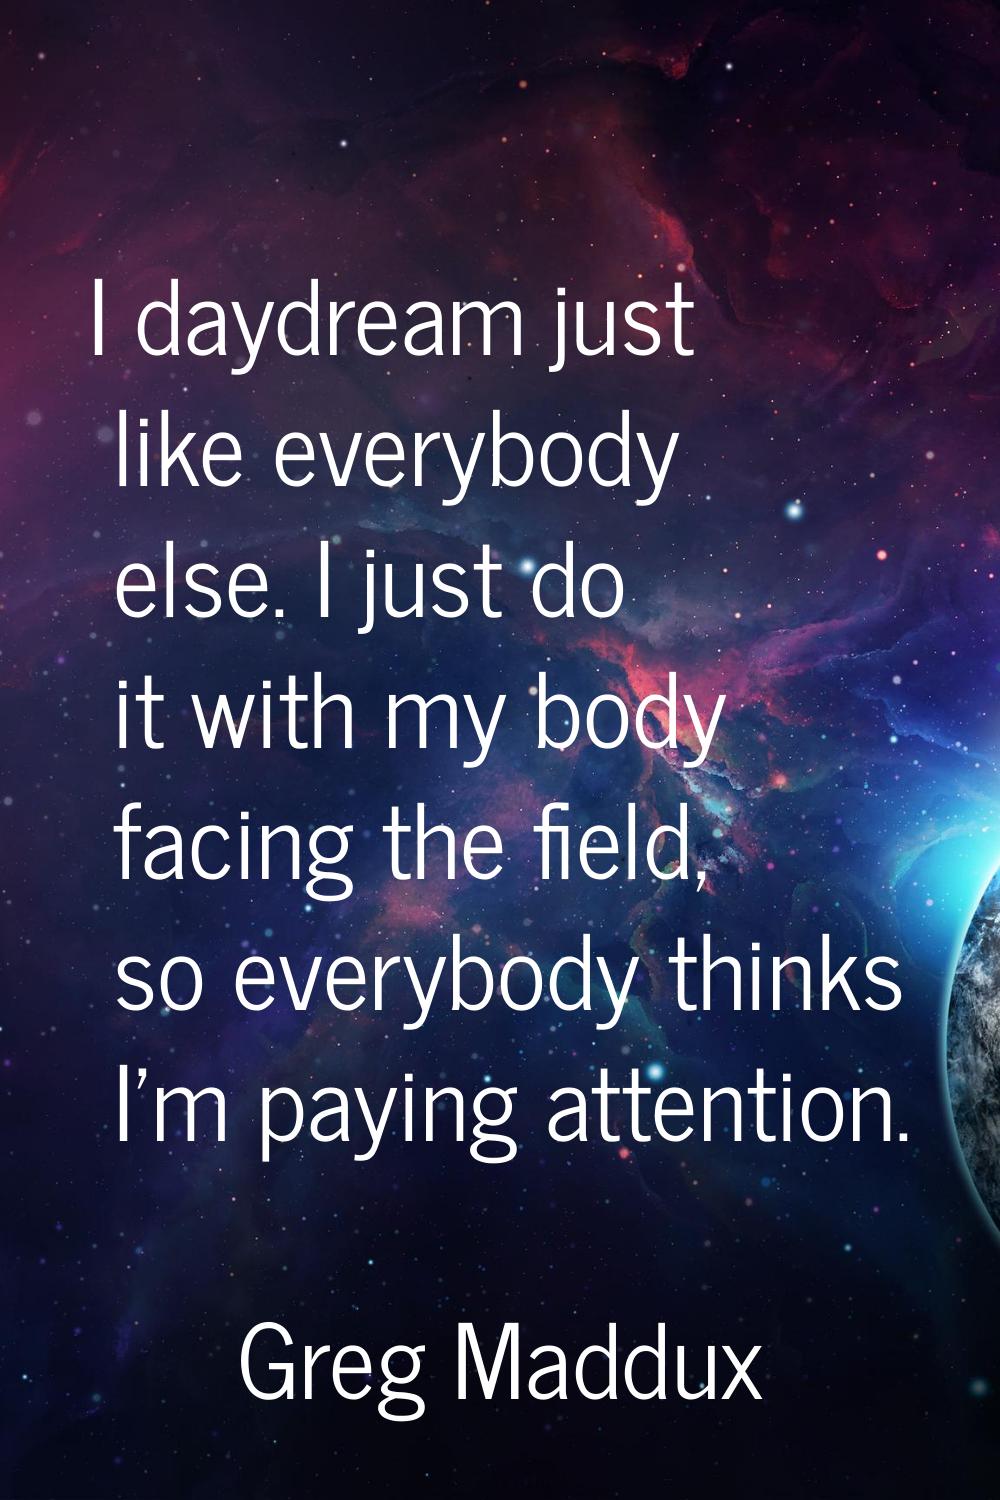 I daydream just like everybody else. I just do it with my body facing the field, so everybody think